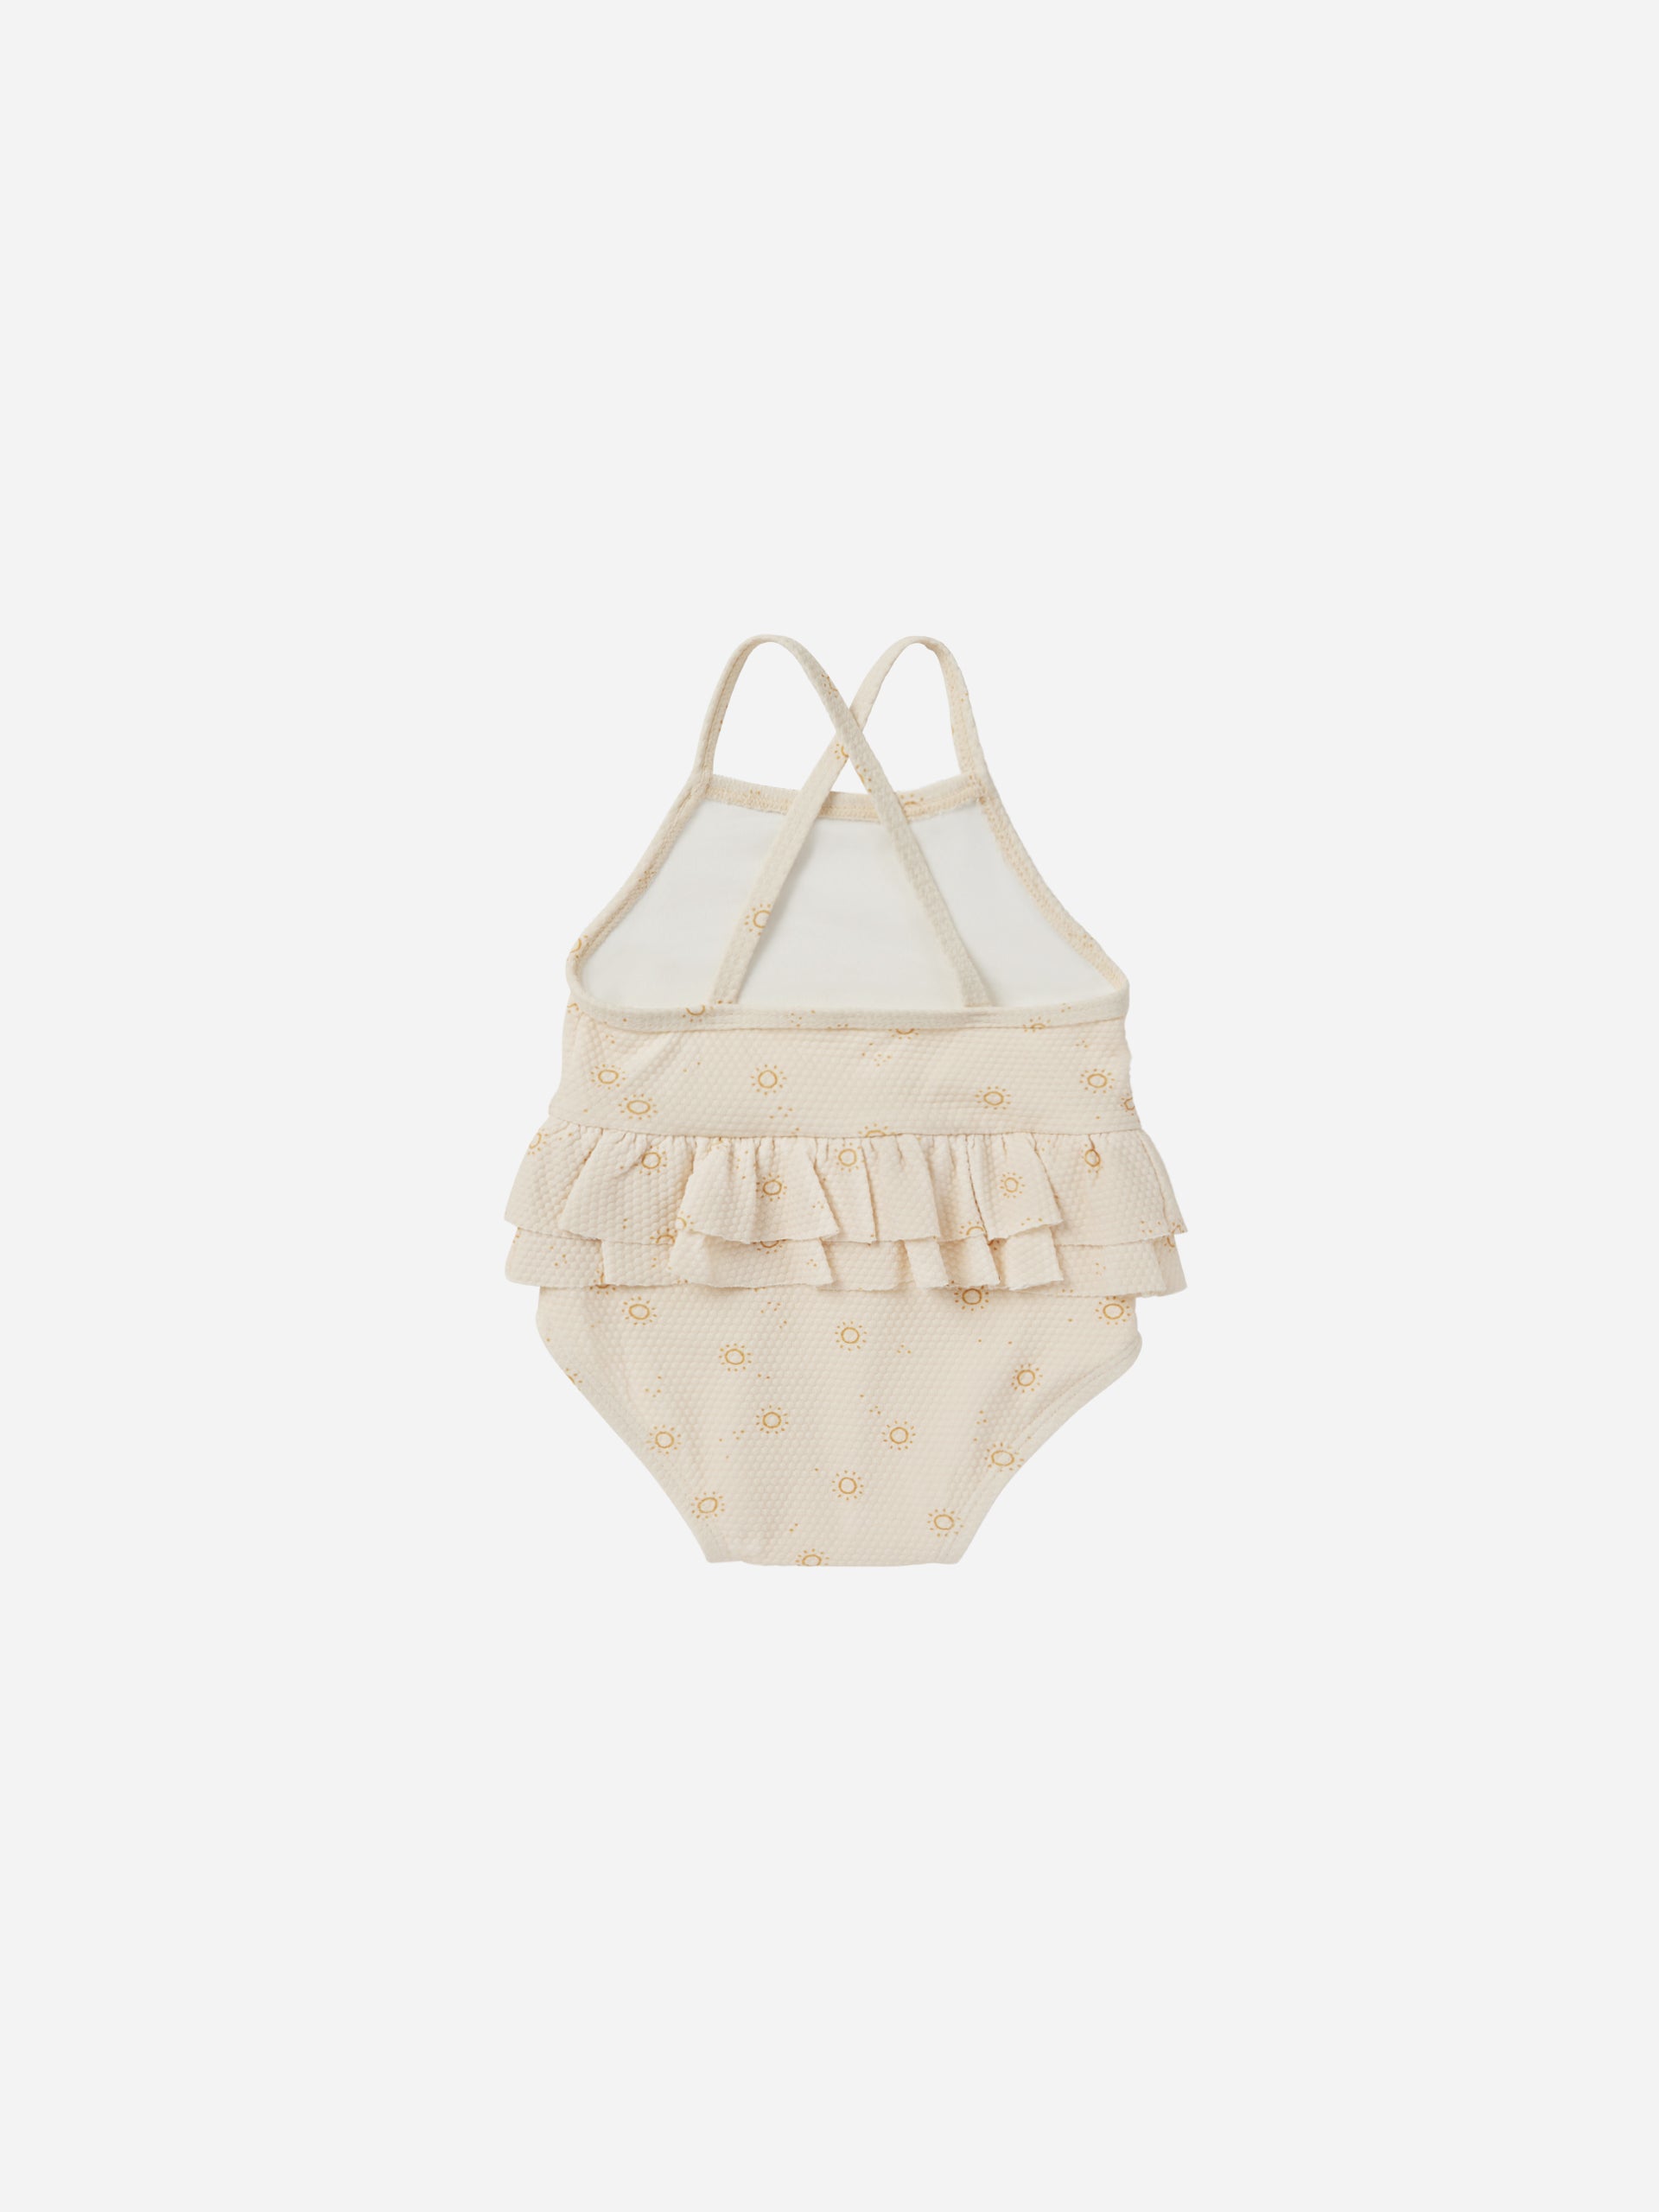 Ruffled One-Piece Swimsuit || Suns - Rylee + Cru | Kids Clothes | Trendy Baby Clothes | Modern Infant Outfits |